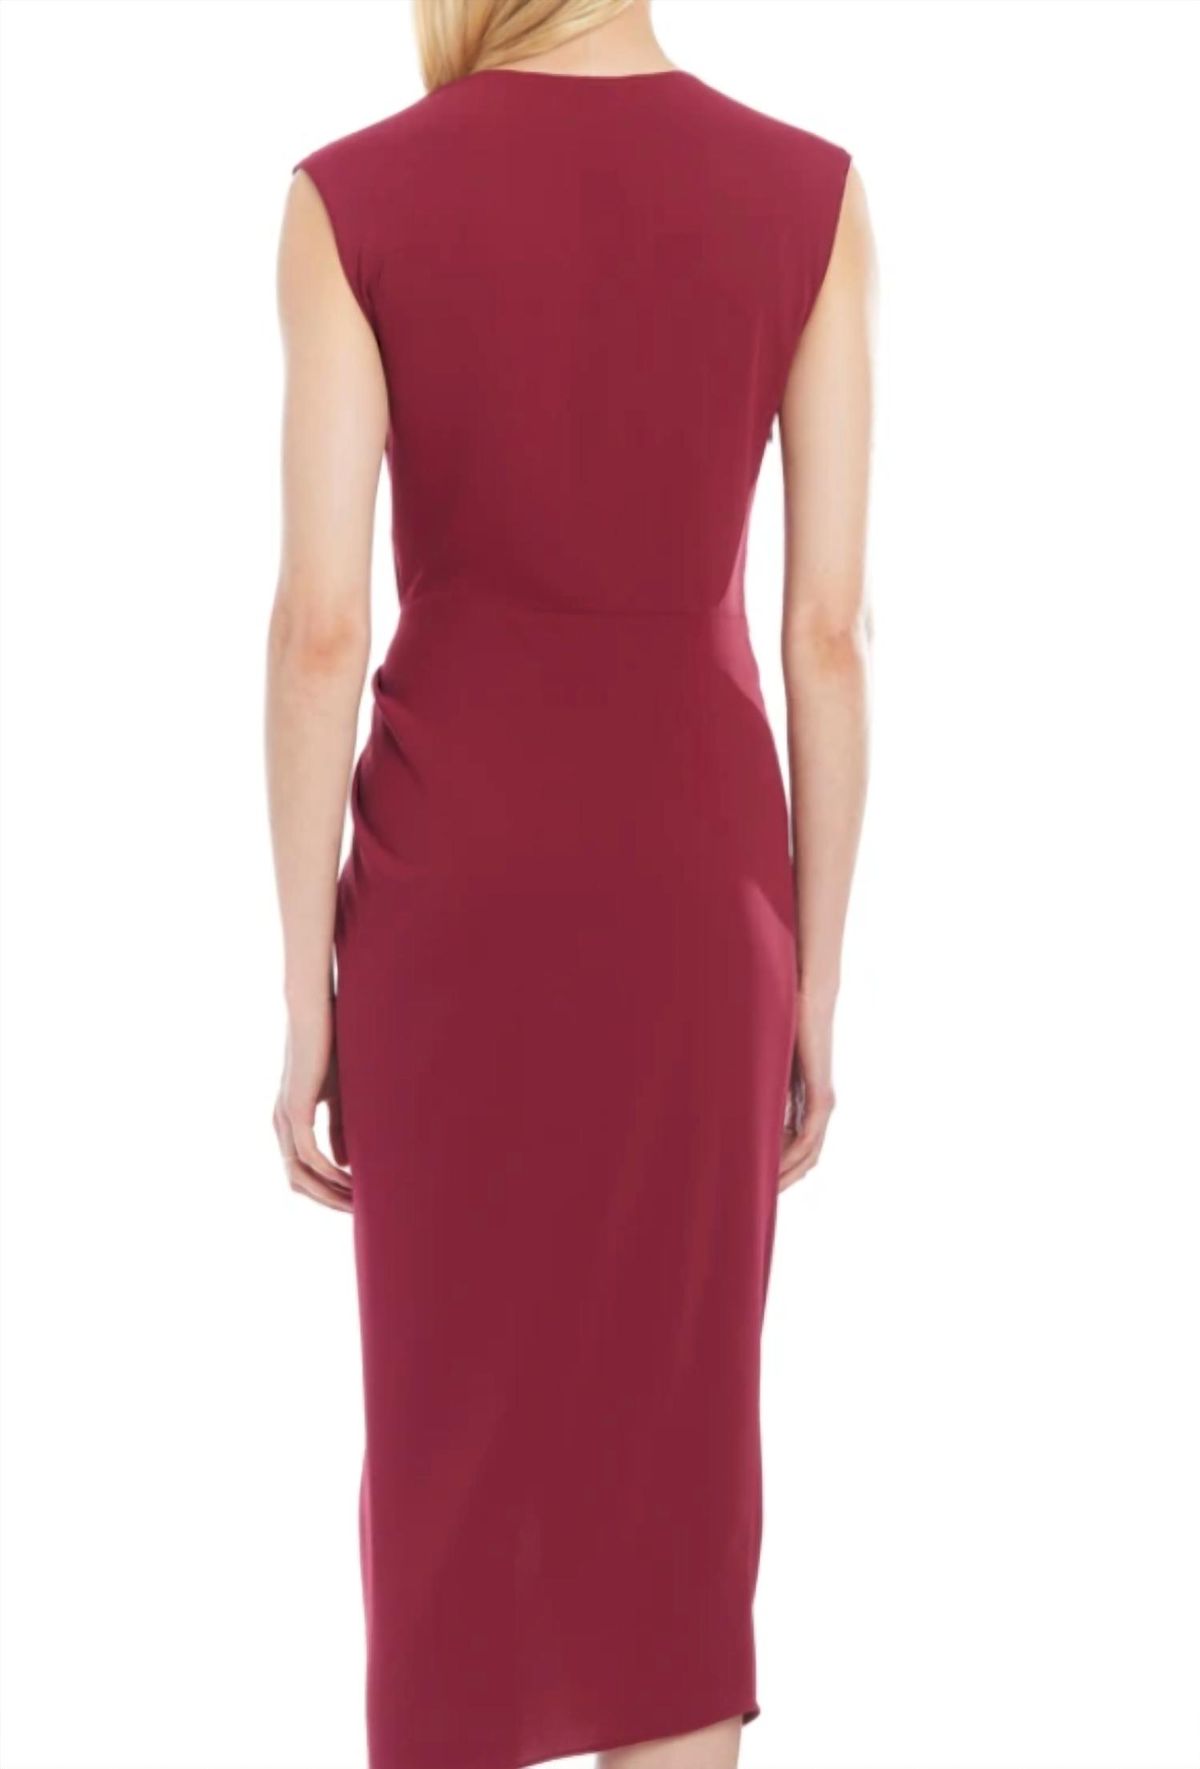 Style 1-4026872443-2696 Amanda Uprichard Size L Wedding Guest Burgundy Red Cocktail Dress on Queenly